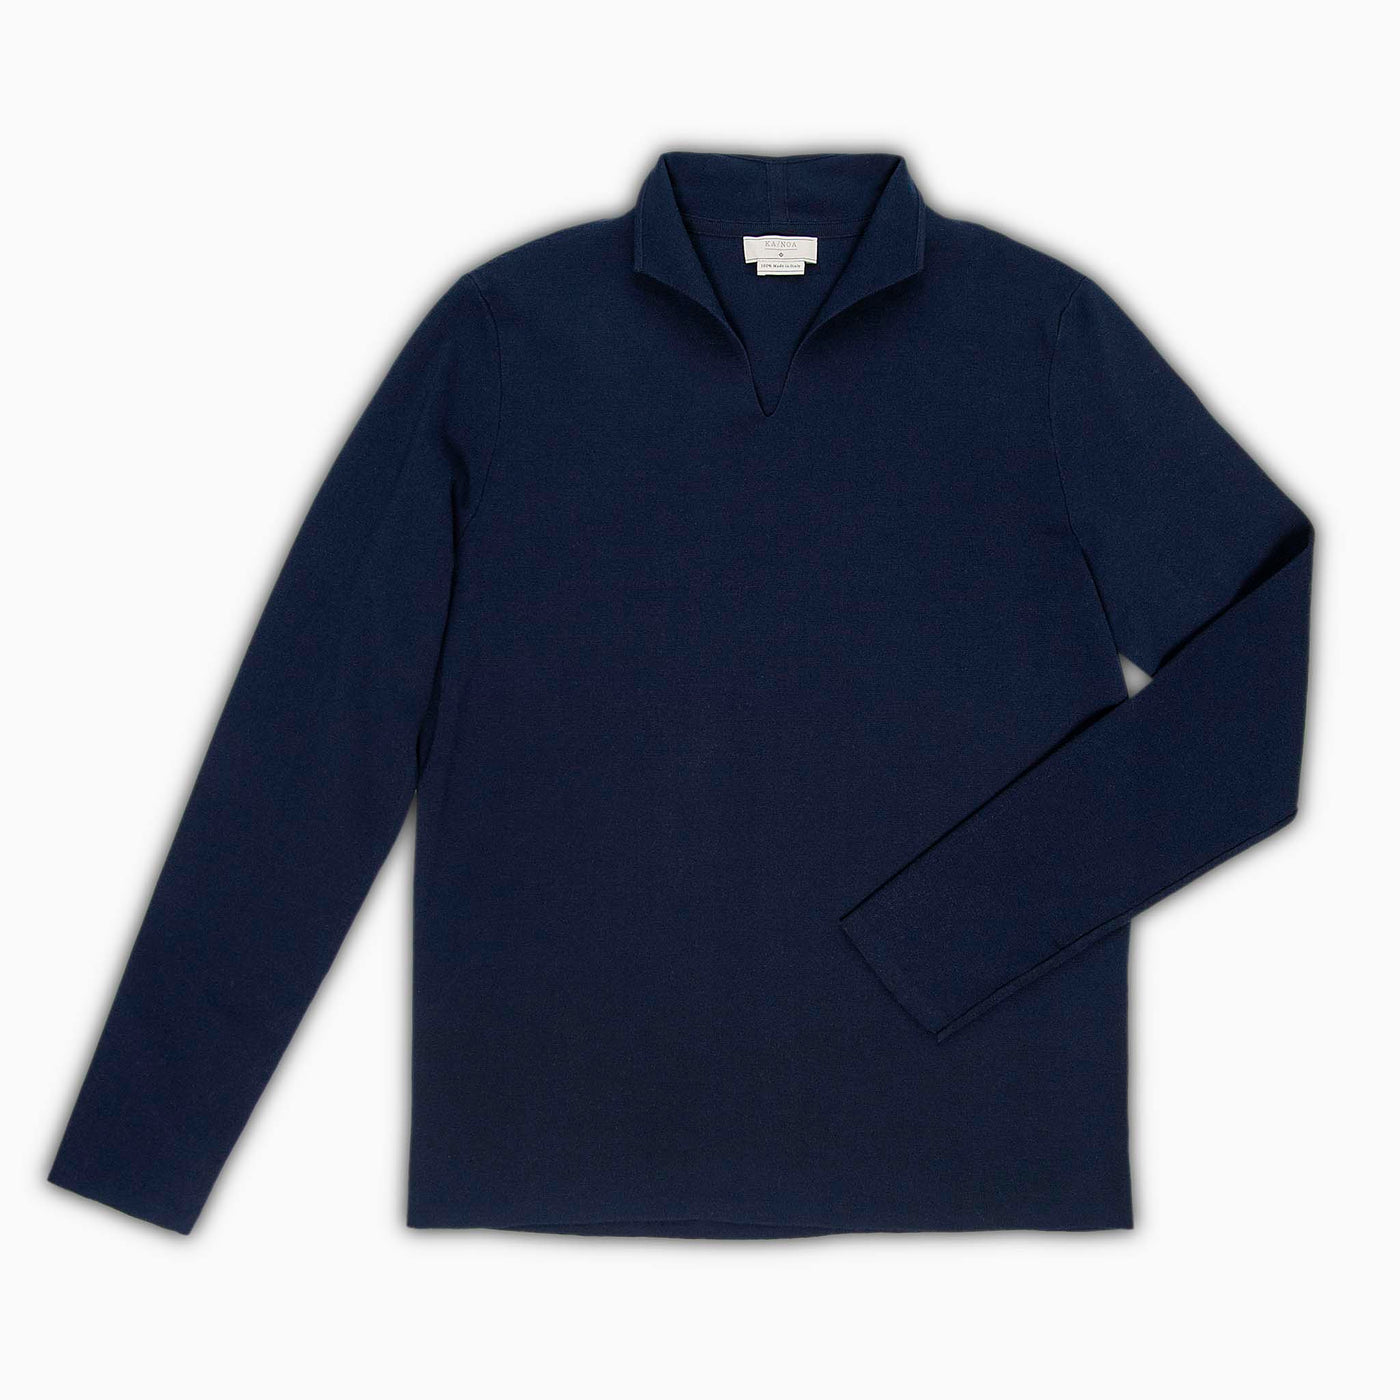 Joel long sleeved jumper with buttonless opening